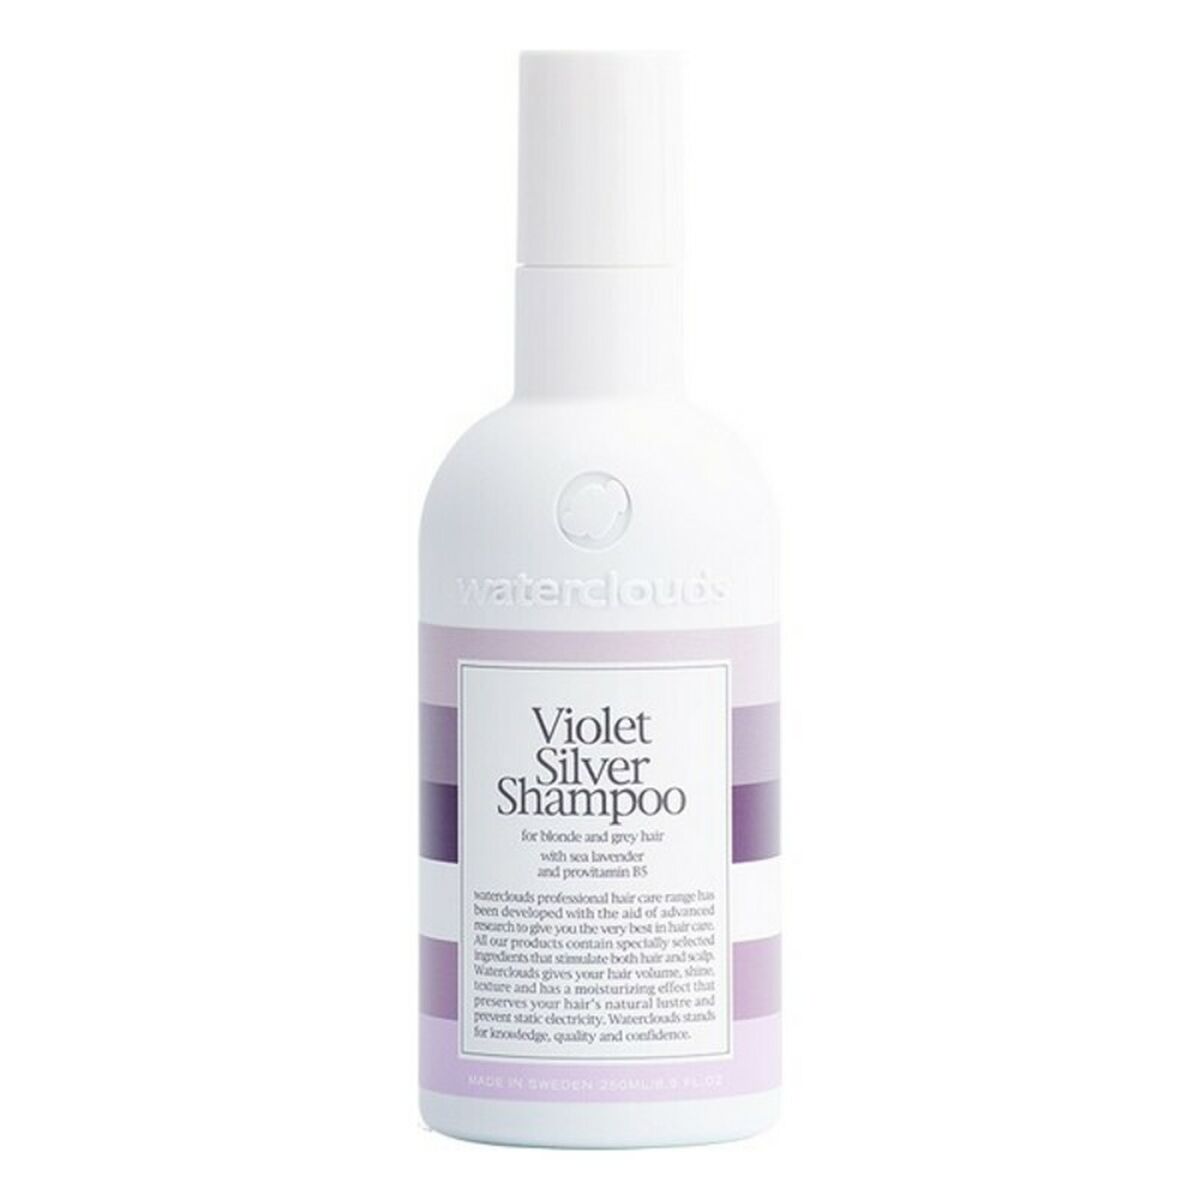 Shampoo Violet Silver Waterclouds (250 ml)